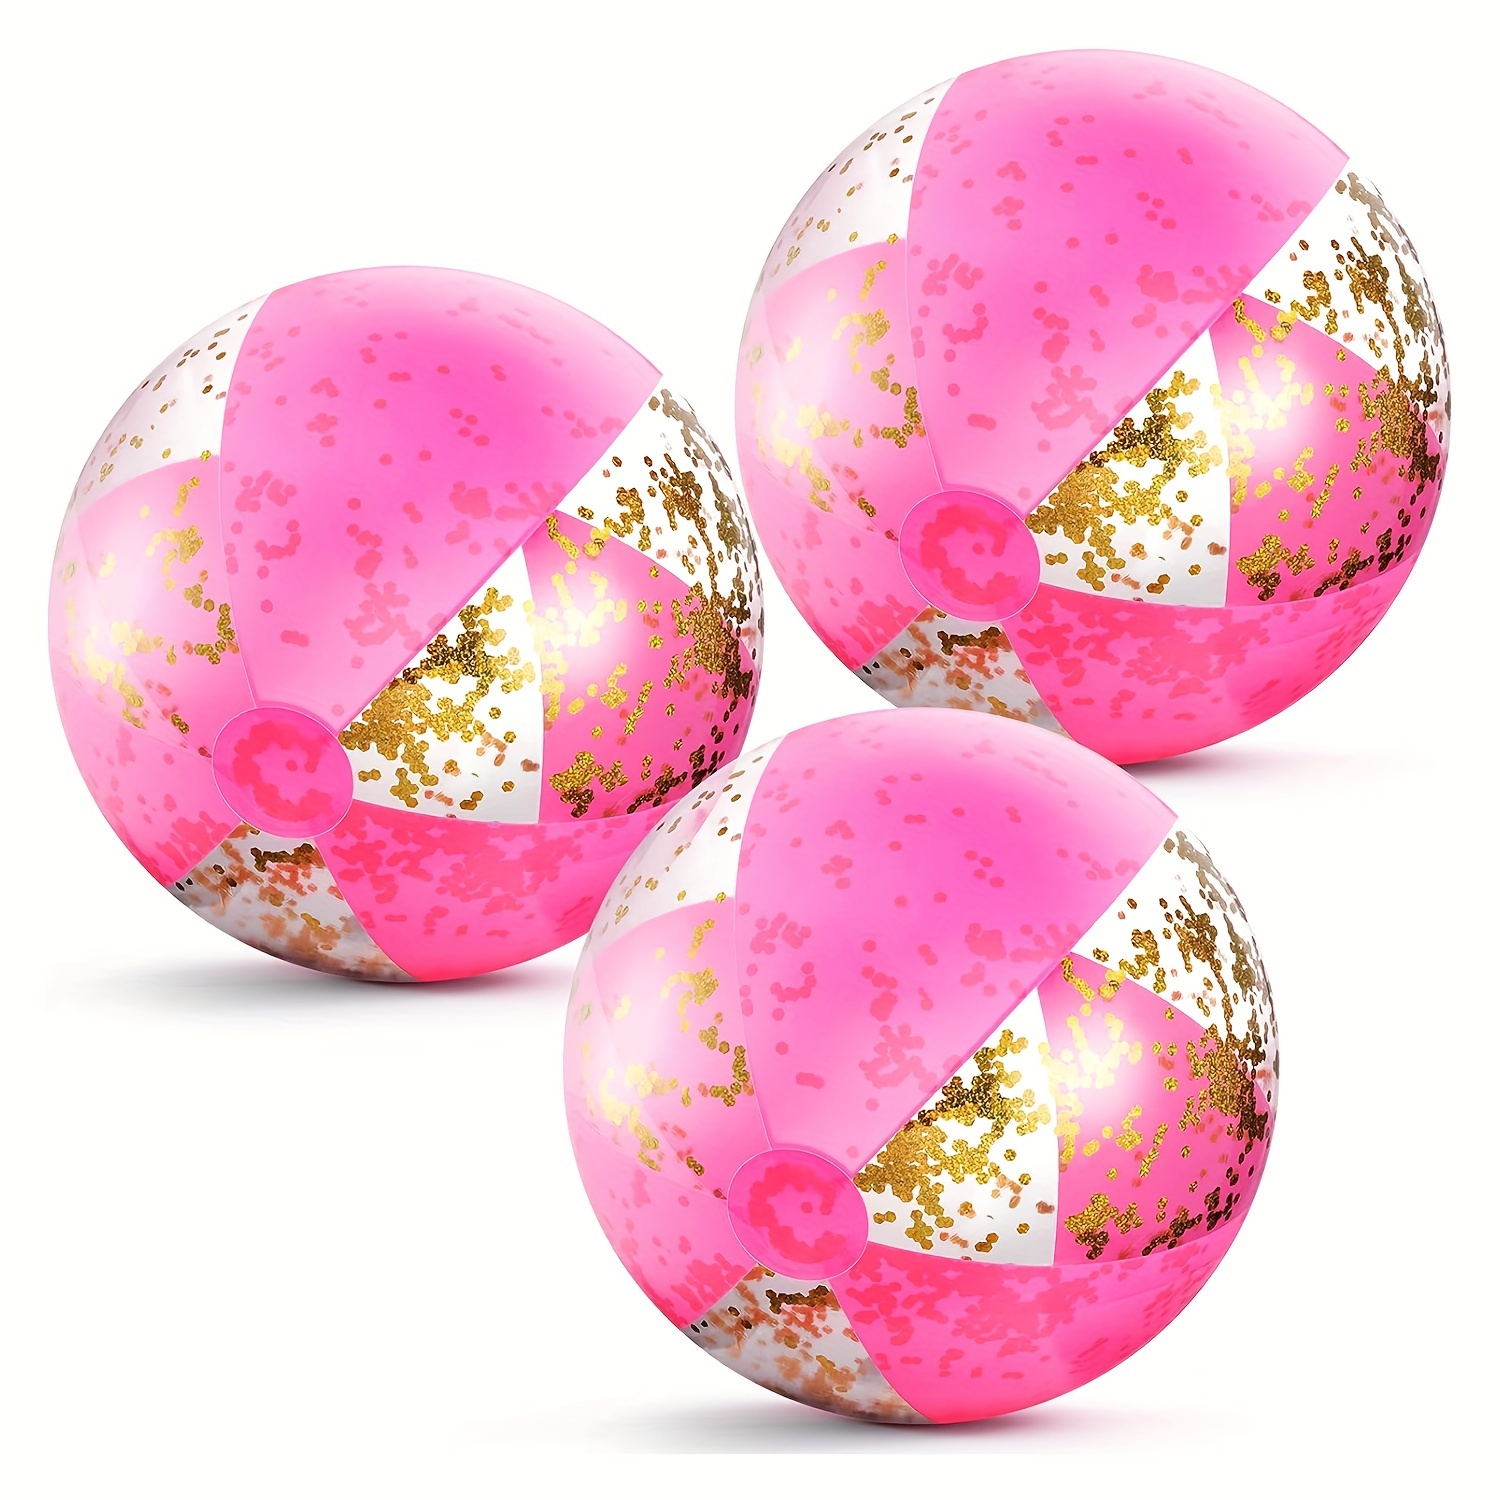 

3-piece Pink Sequin Inflatable Beach Balls - Perfect For Pool Parties & Outdoor Fun, Durable Pvc Material, Ideal For Ages 14+